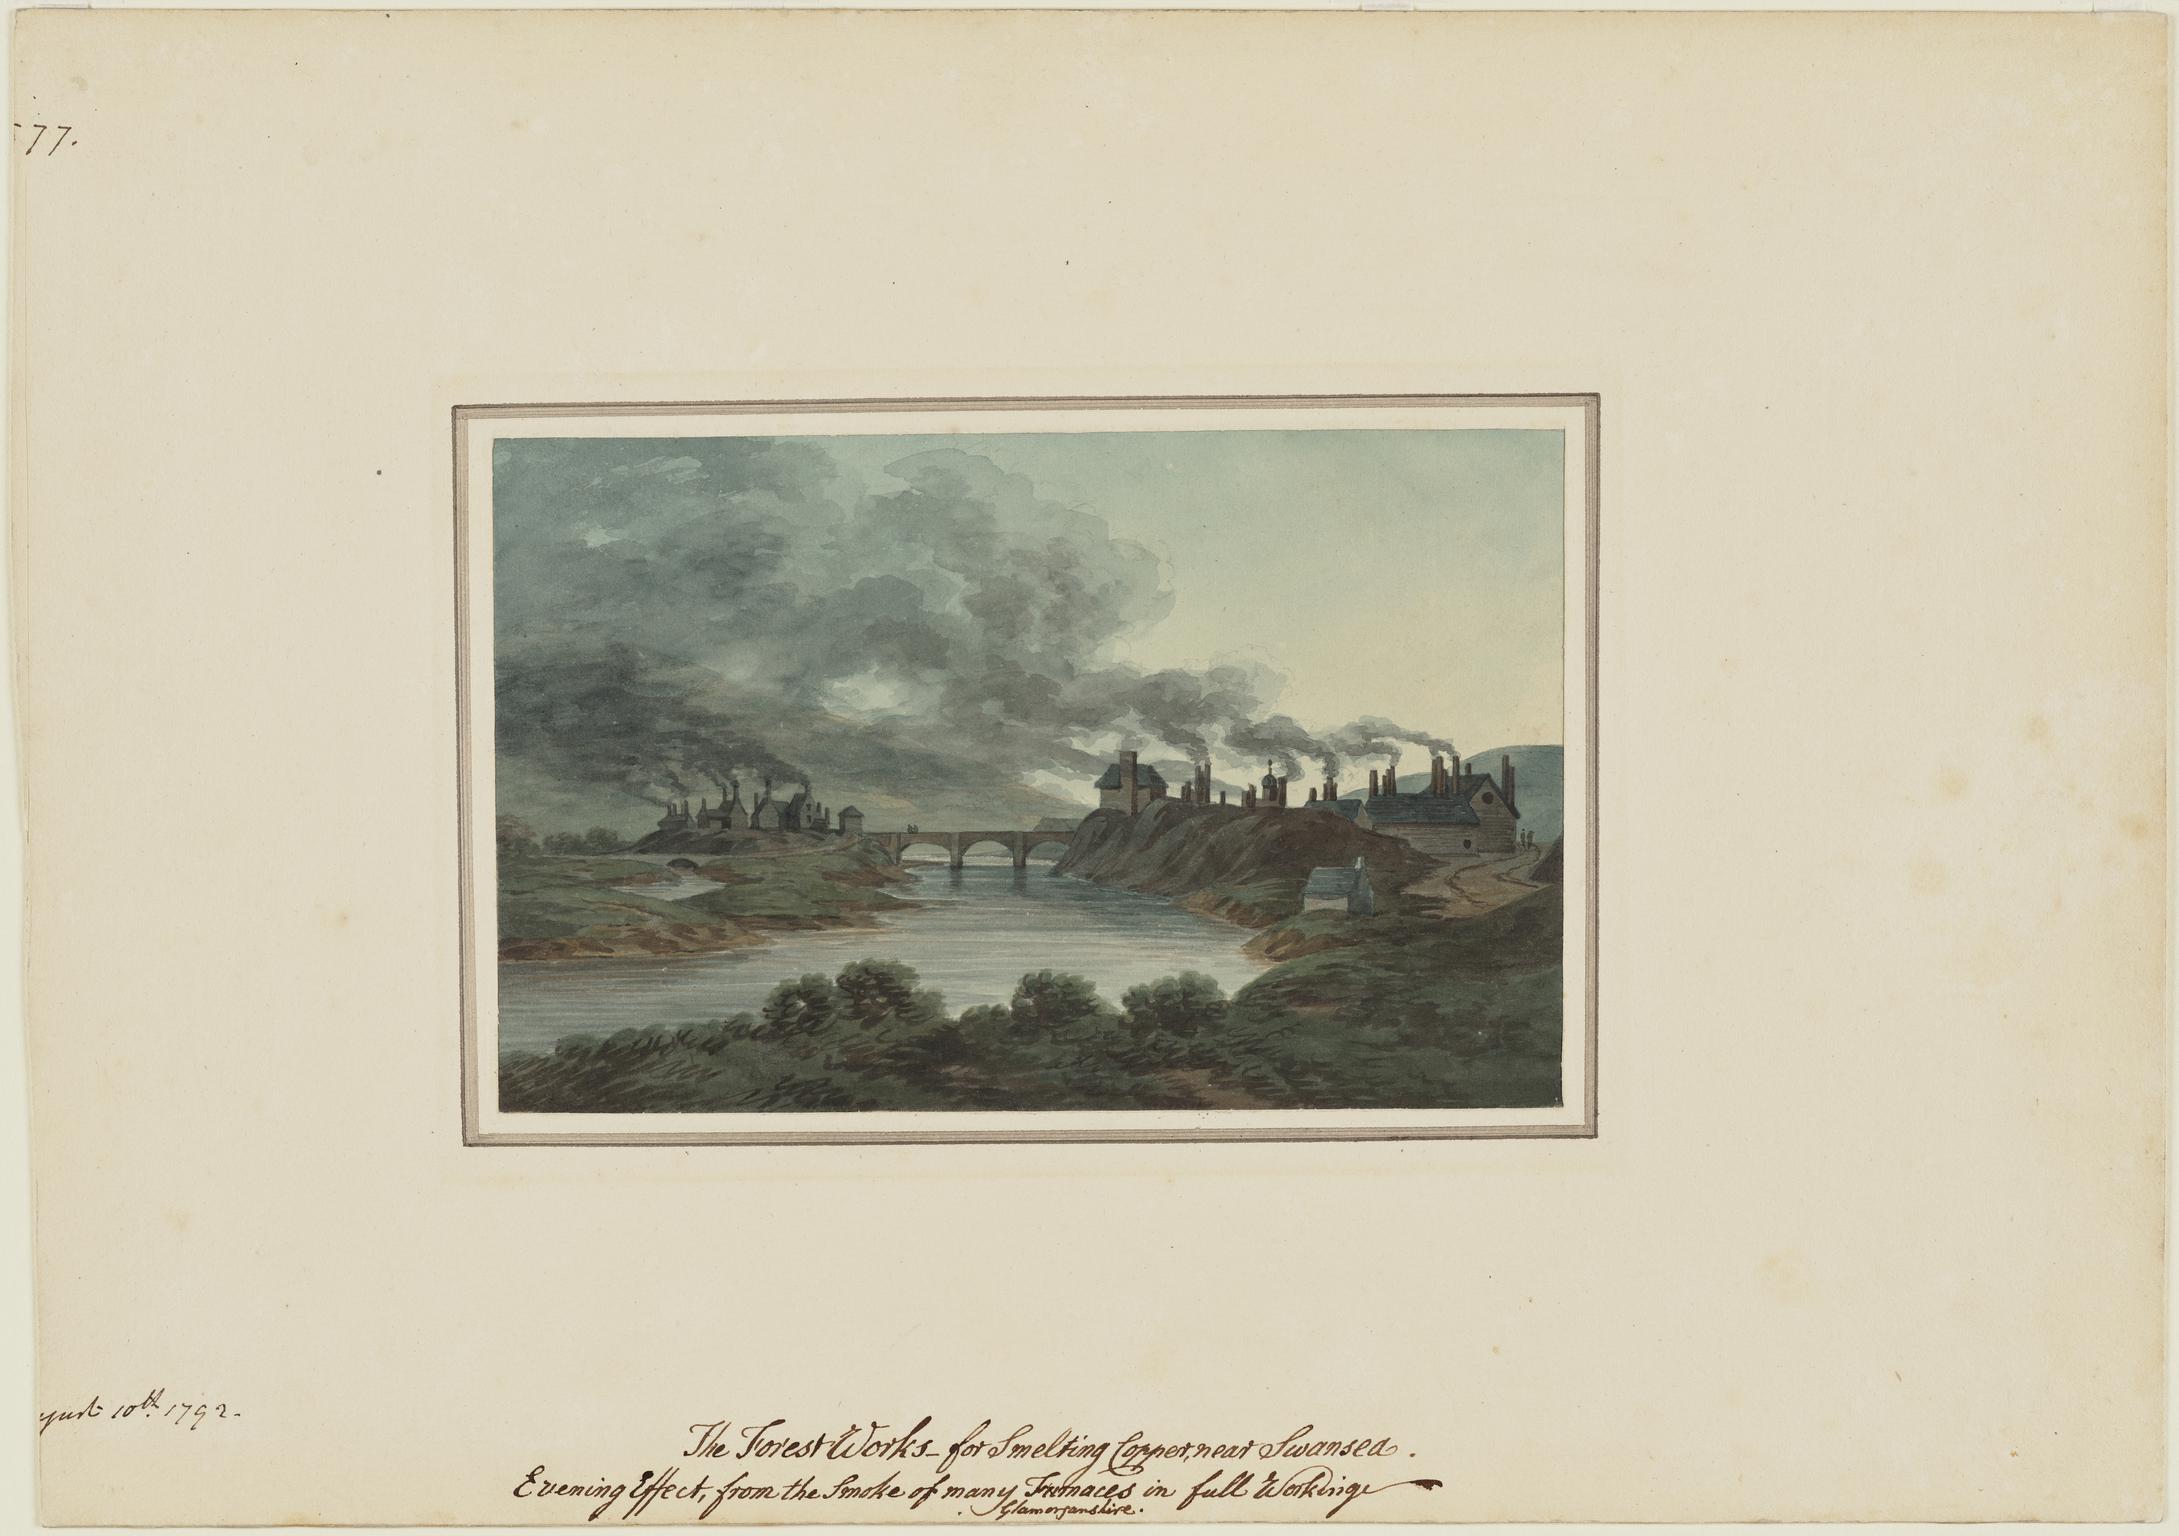 The Forest Works near Swansea 1792